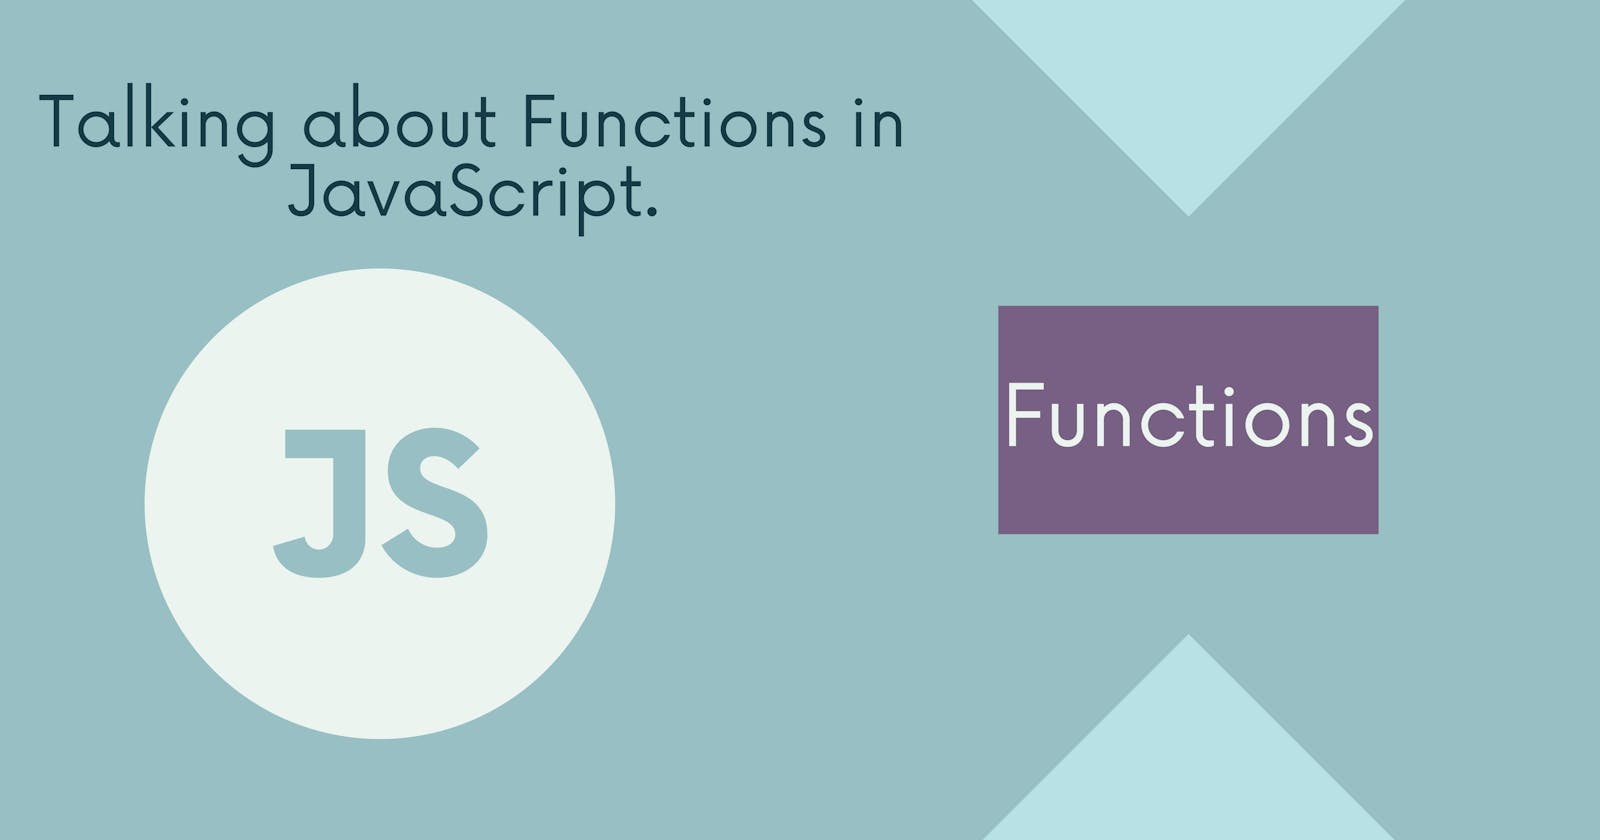 Talking about Functions in JavaScript.